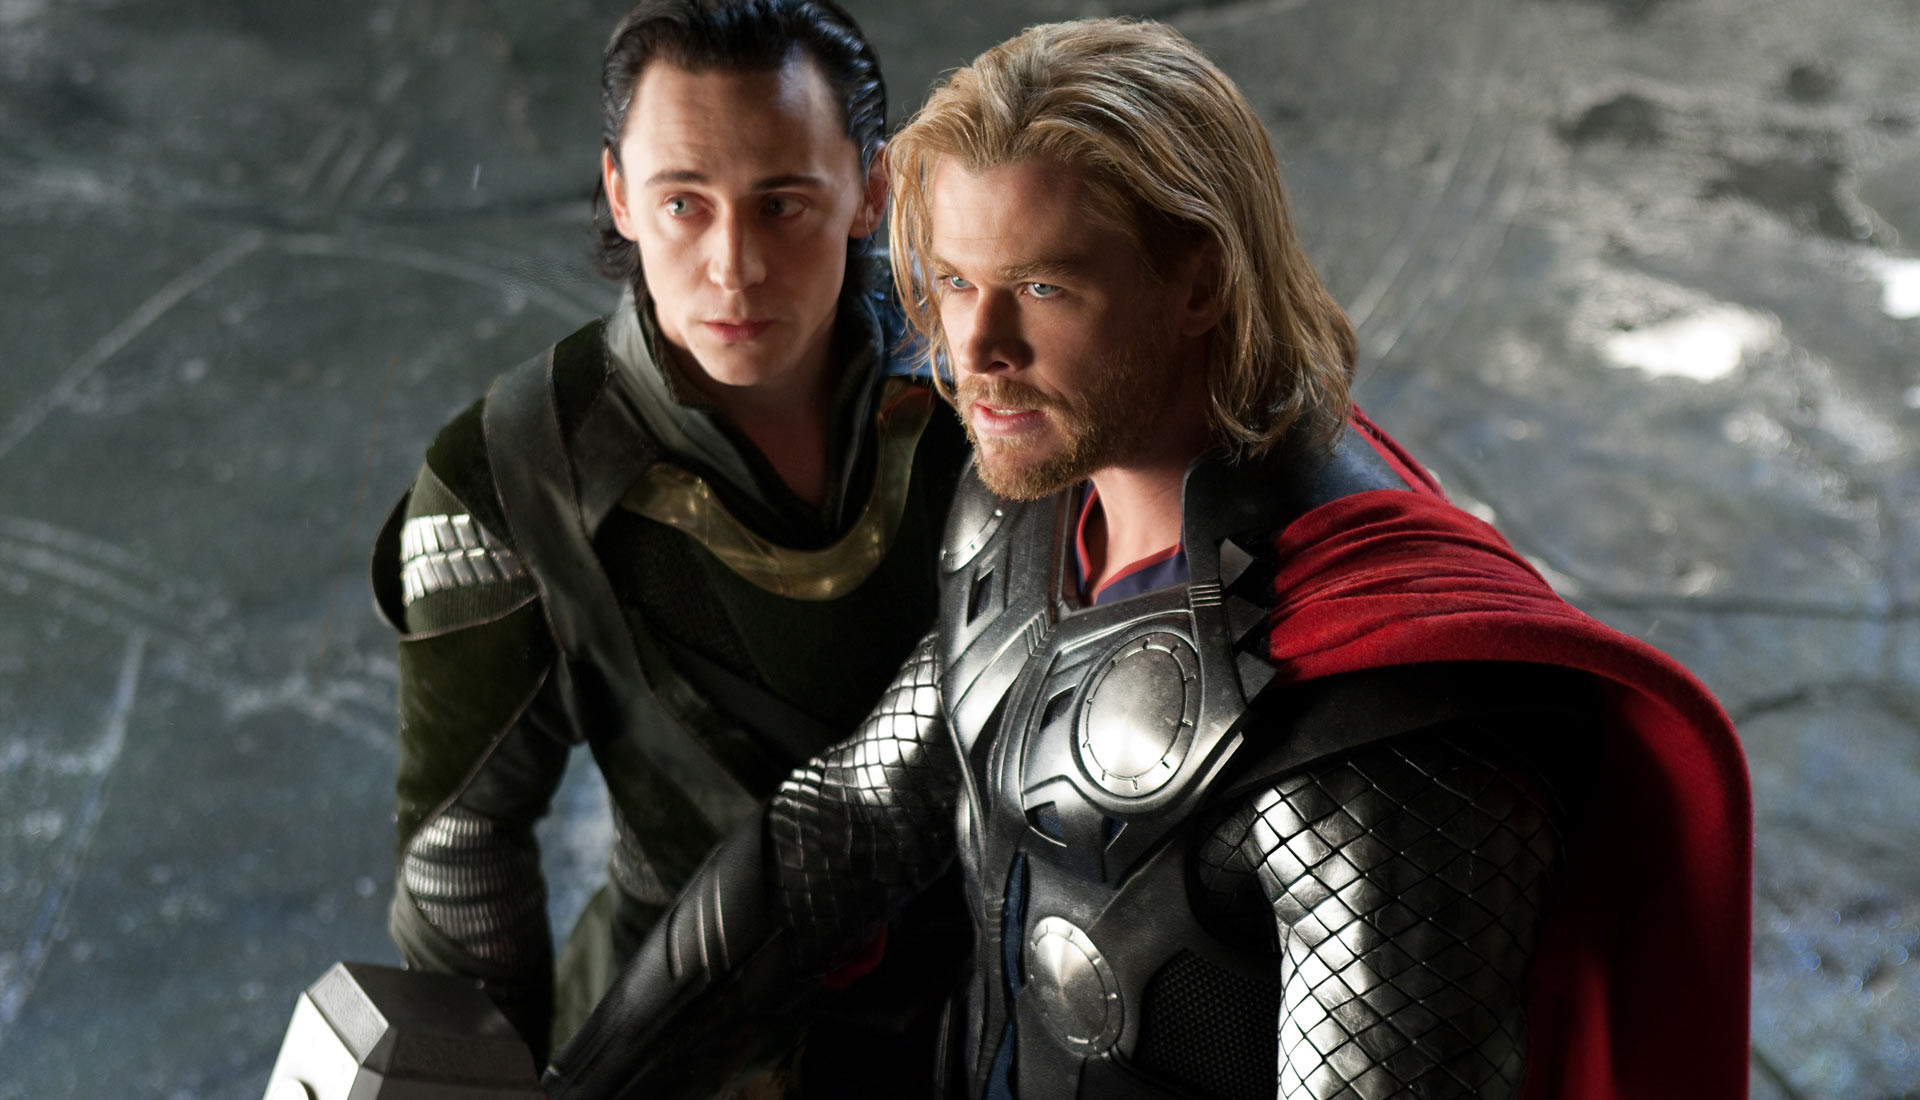 1920x1100 Loki and Thor from the Marvel Studios movie Thor wallpaper